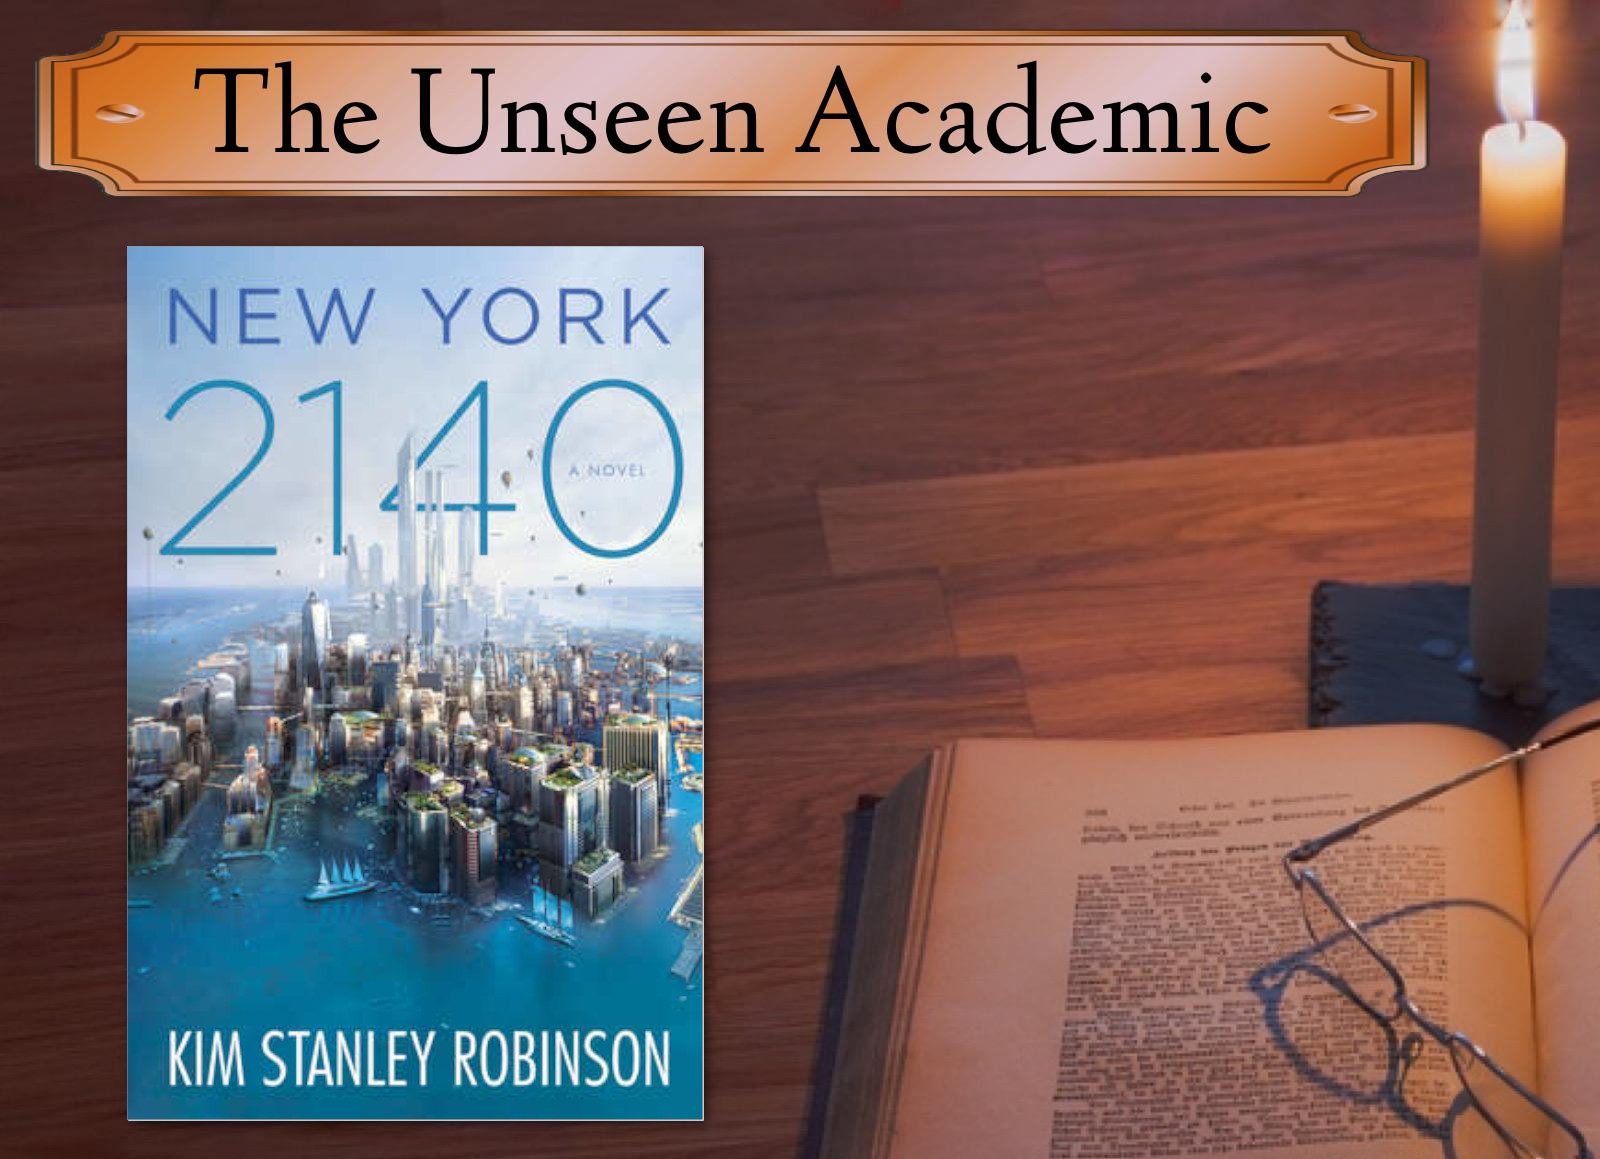 new york 2140 book review